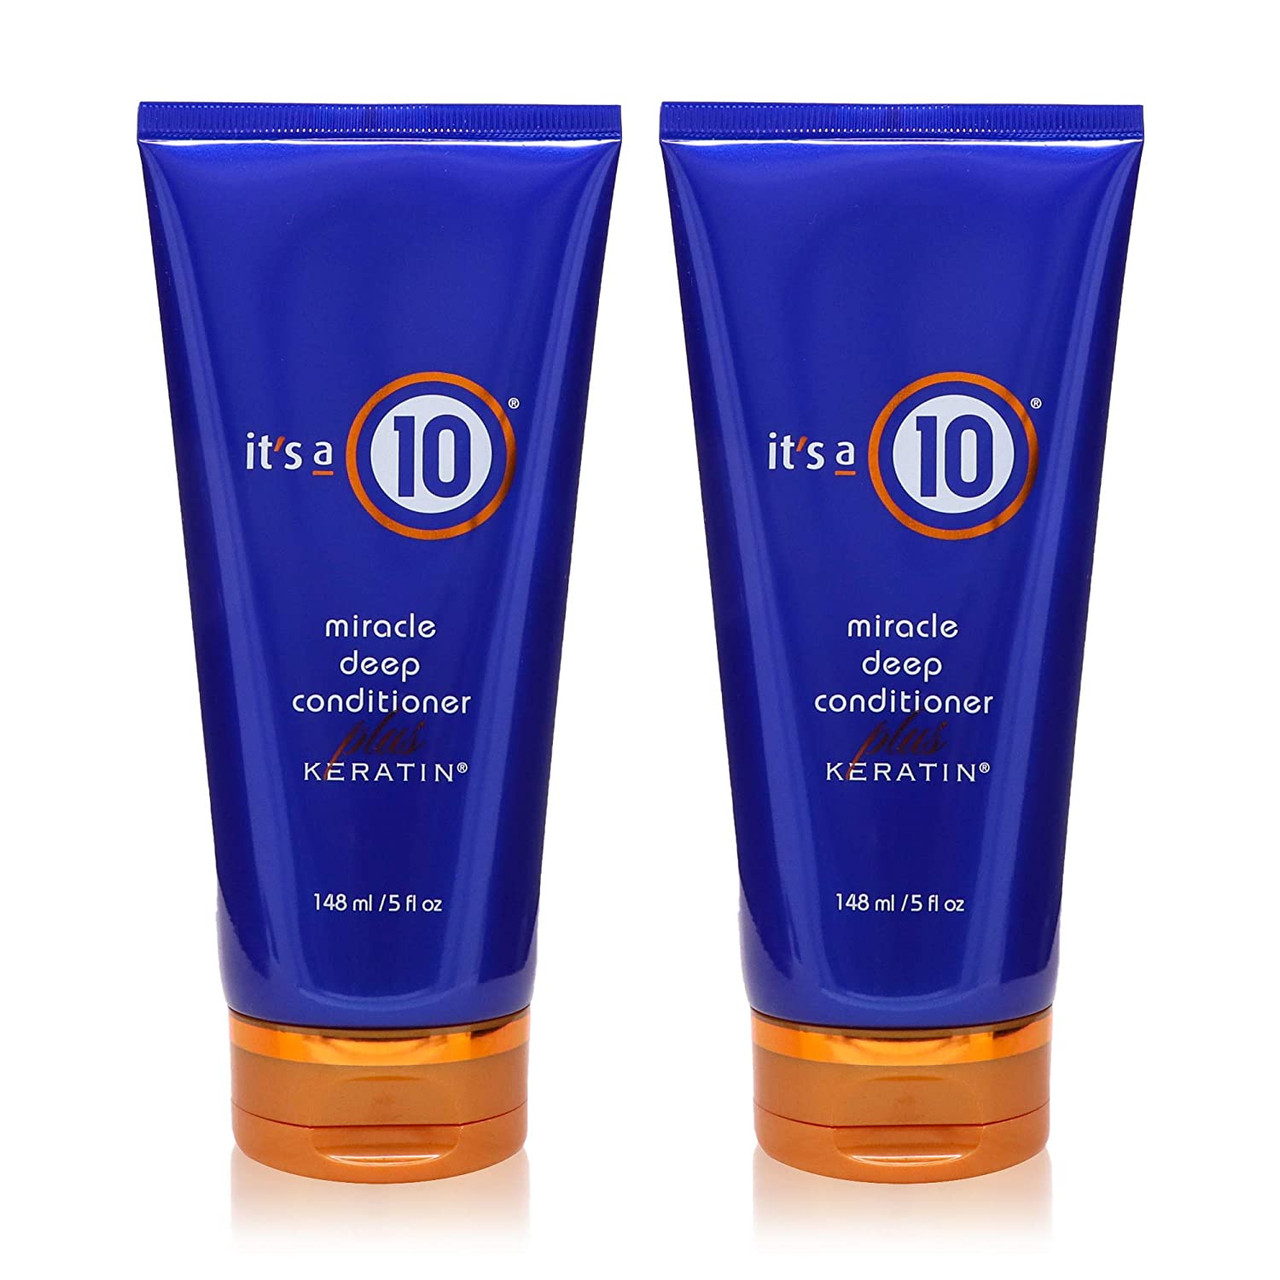 It's a 10 Haircare Miracle Leave-In Product Plus Keratin 4 fl. oz.